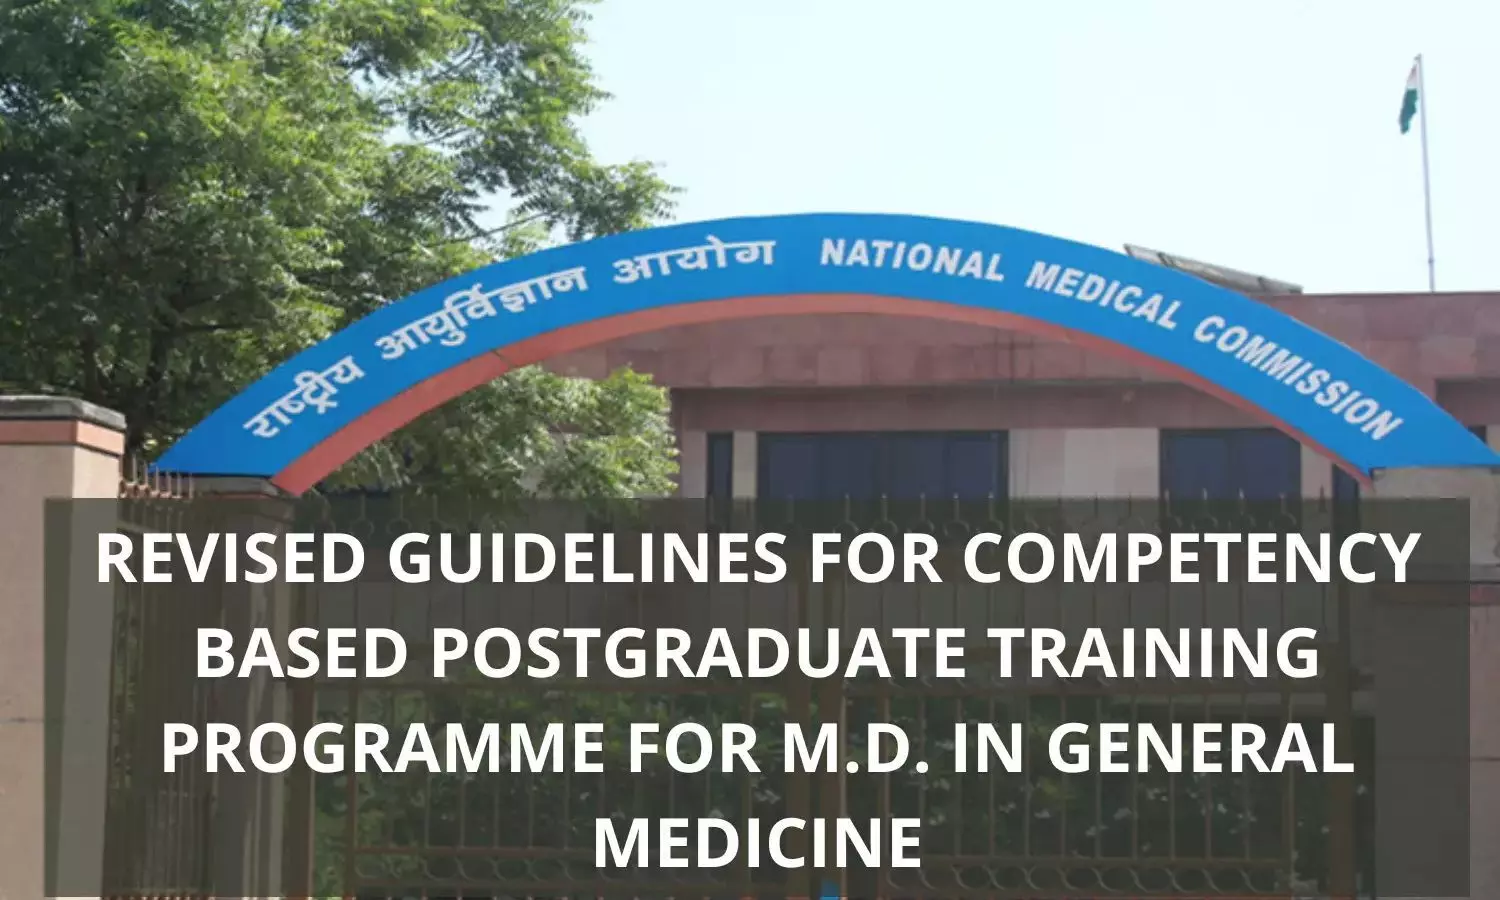 NMC issues Revised Guidelines For Competency-Based Postgraduate Training Programme For MD (General Medicine)